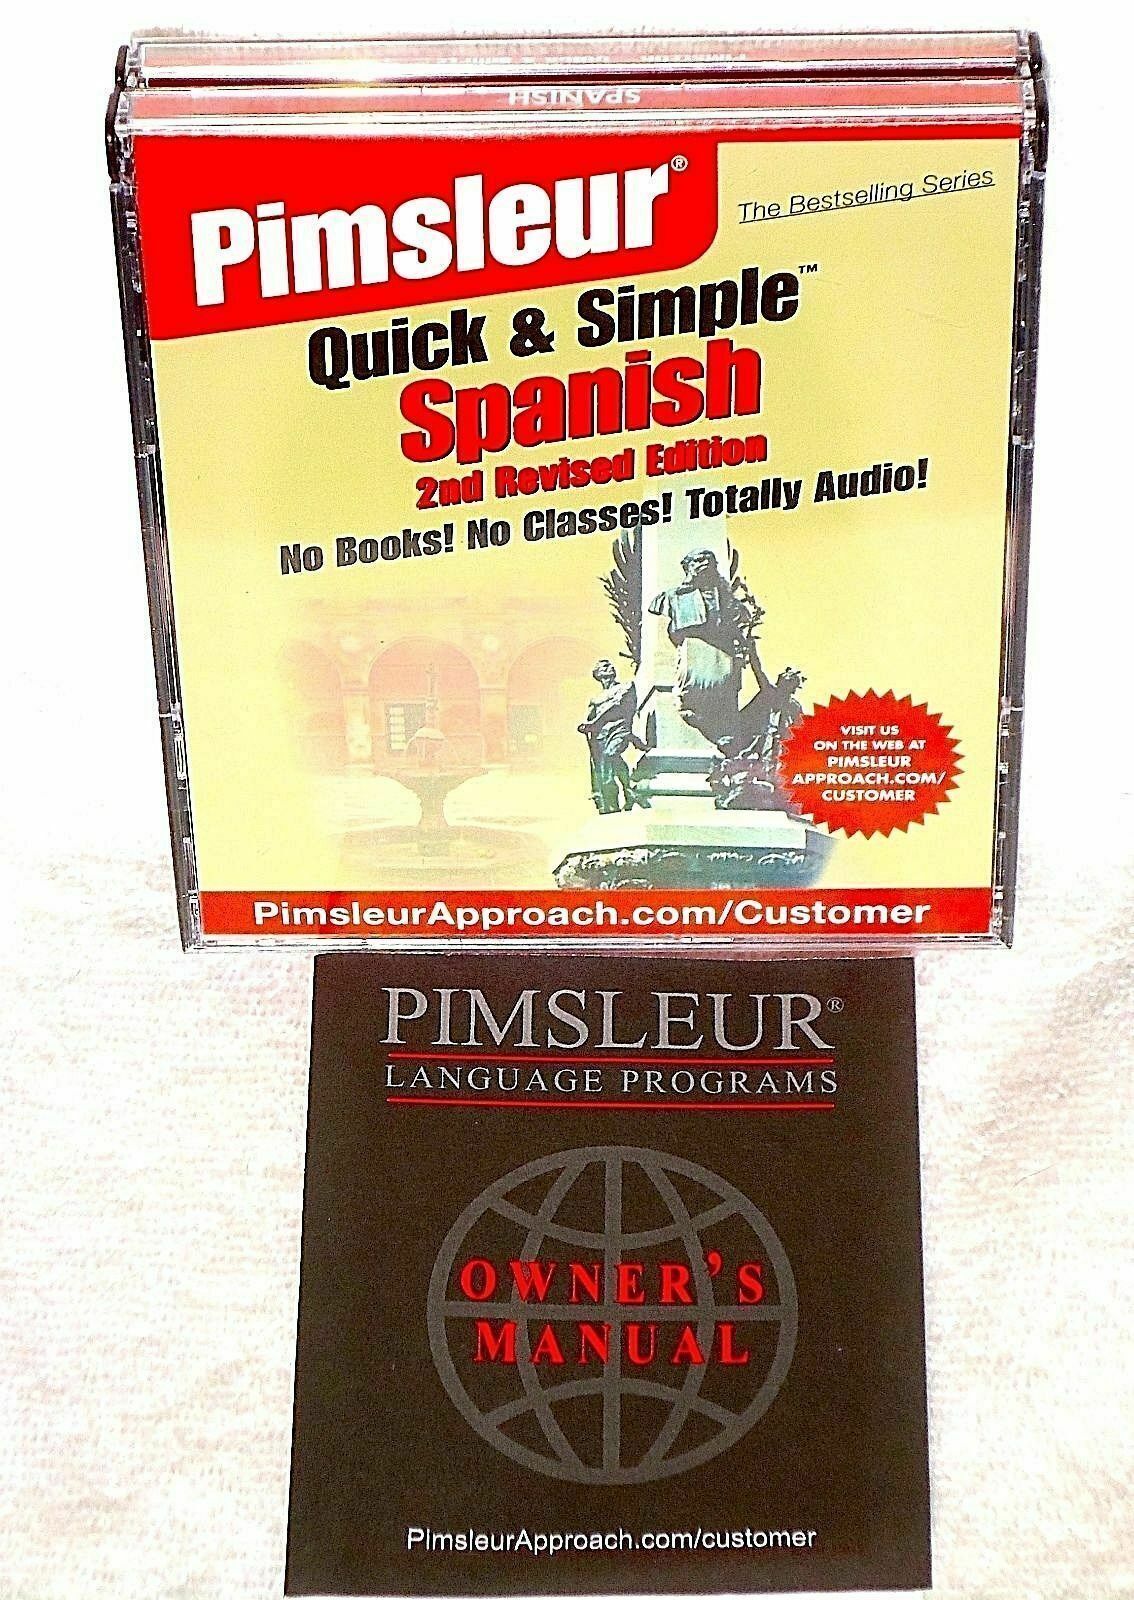 📀4Disc Set:Simon&Schuster's Pimsleur Quick & Simple 2nd Revised Edition Spanish